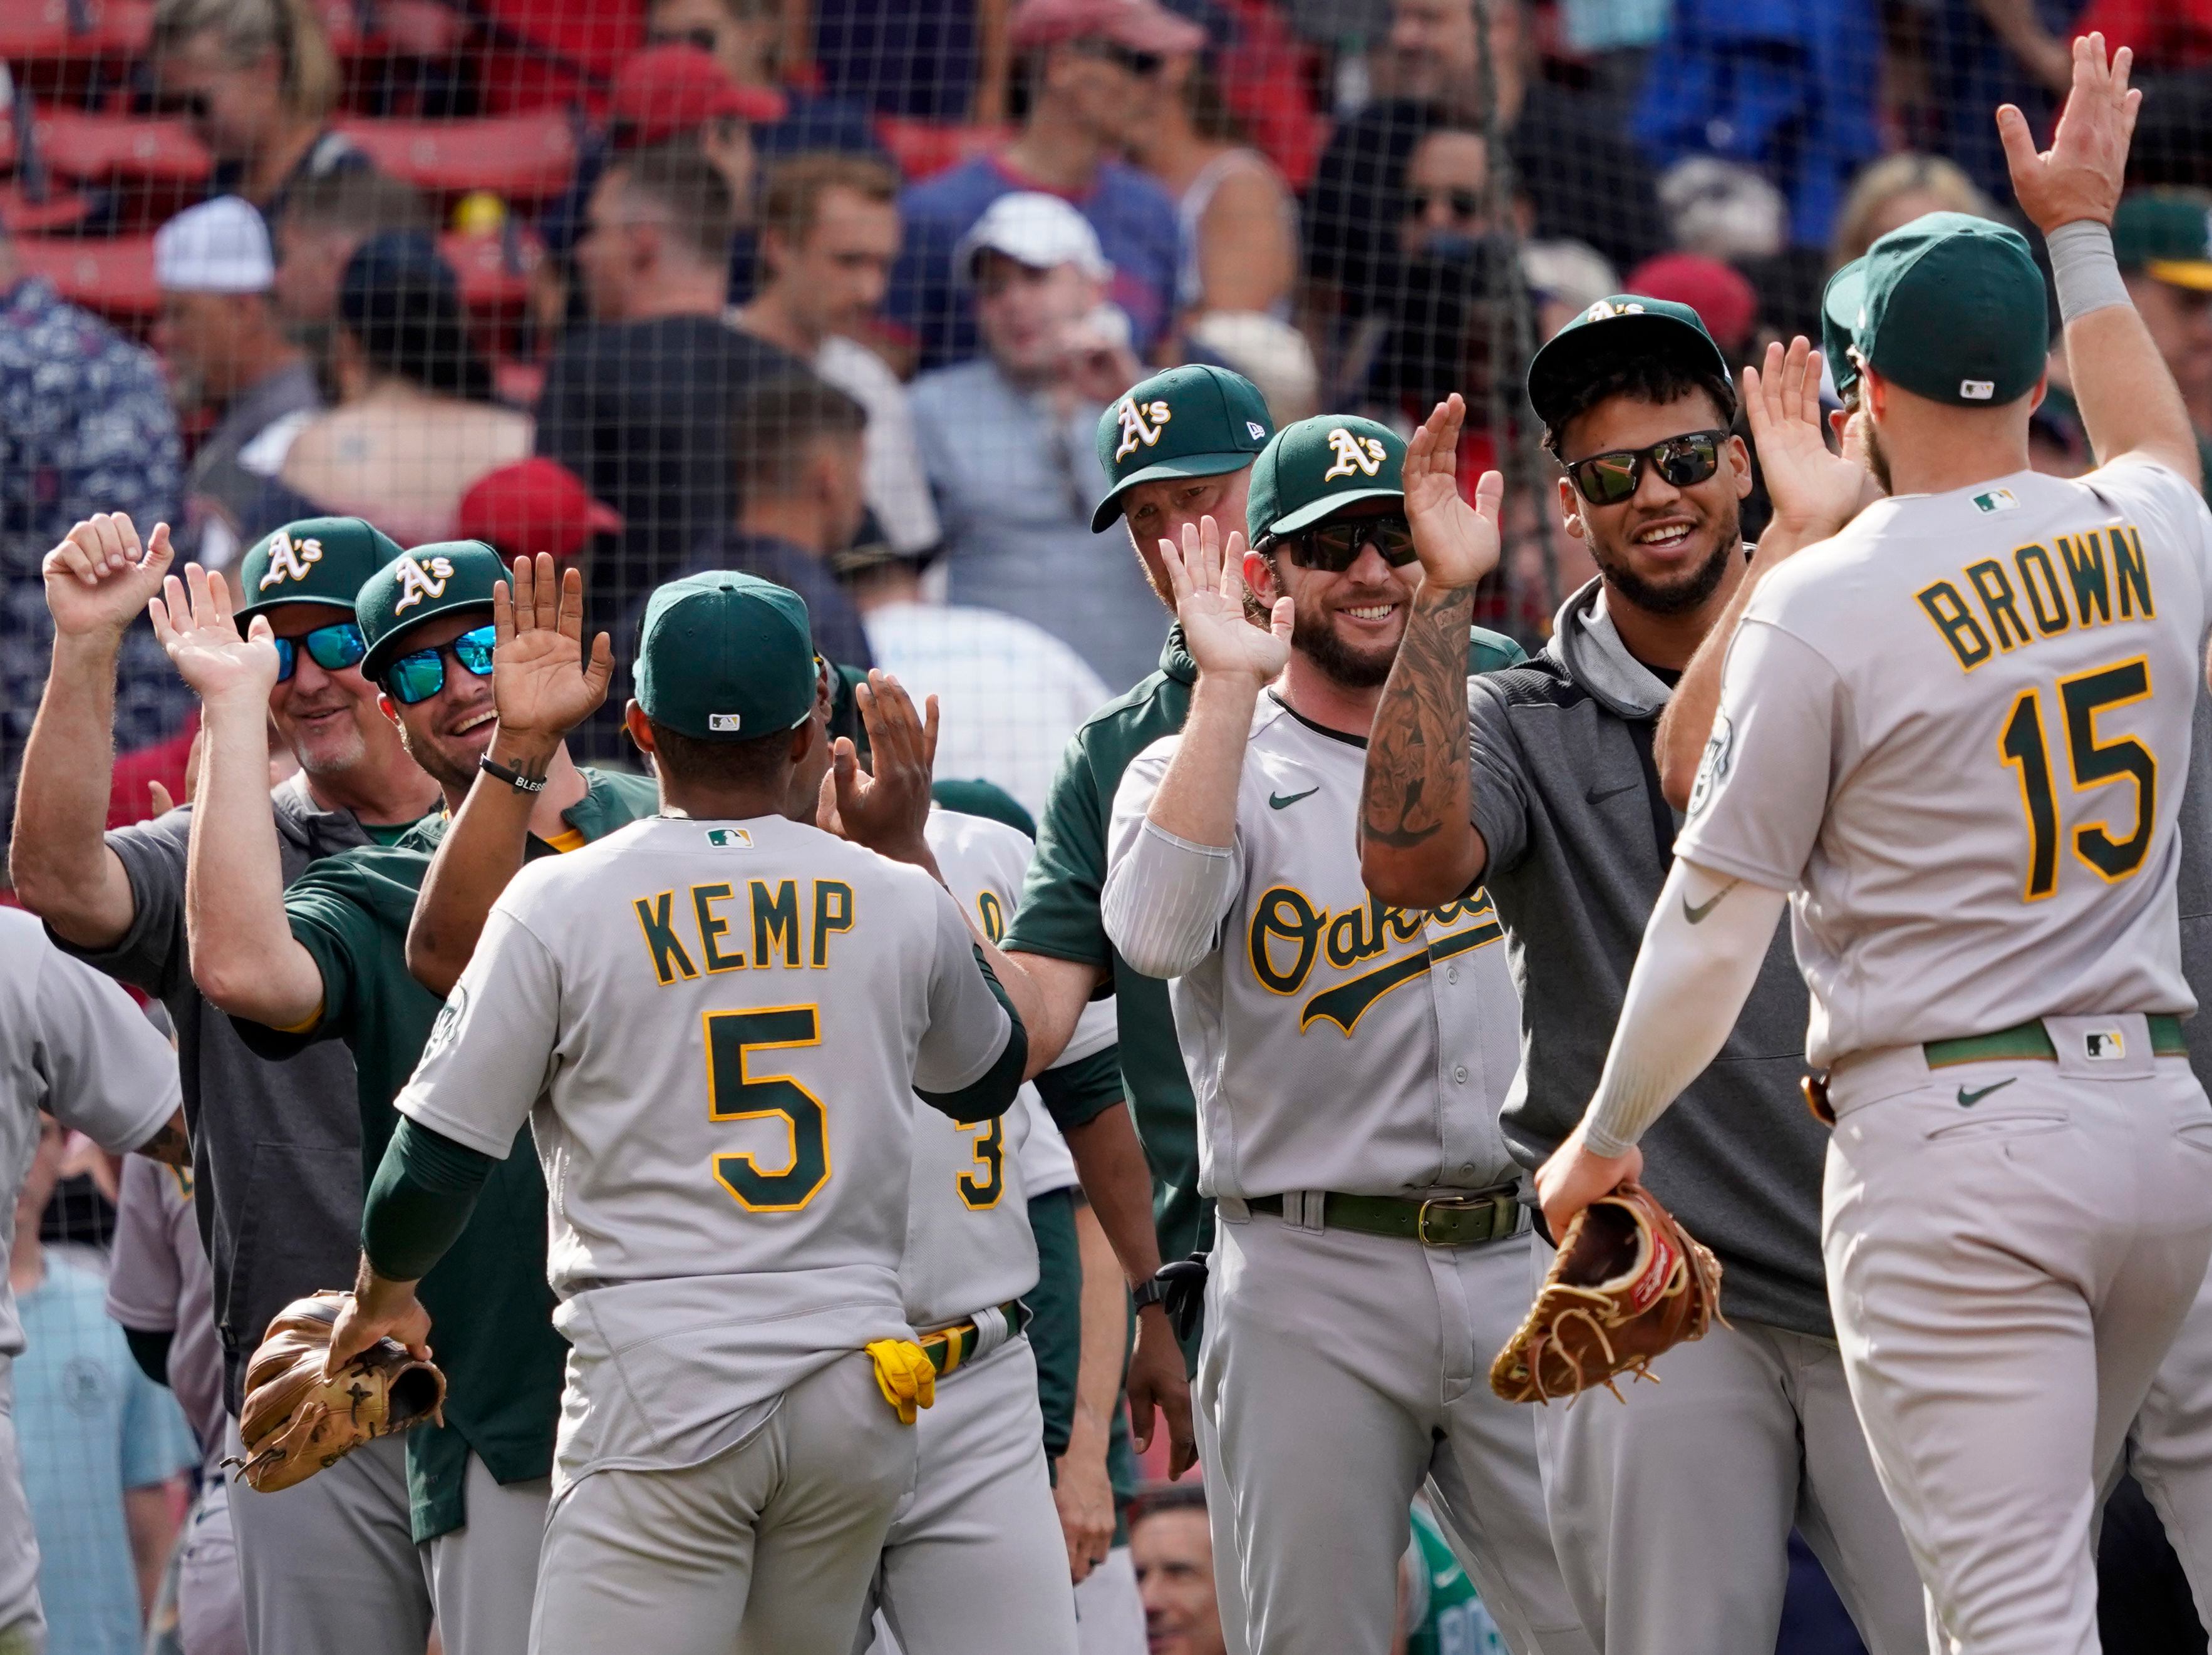 A's hold off Bosox, avoid sweep for just 2nd win in 15 games